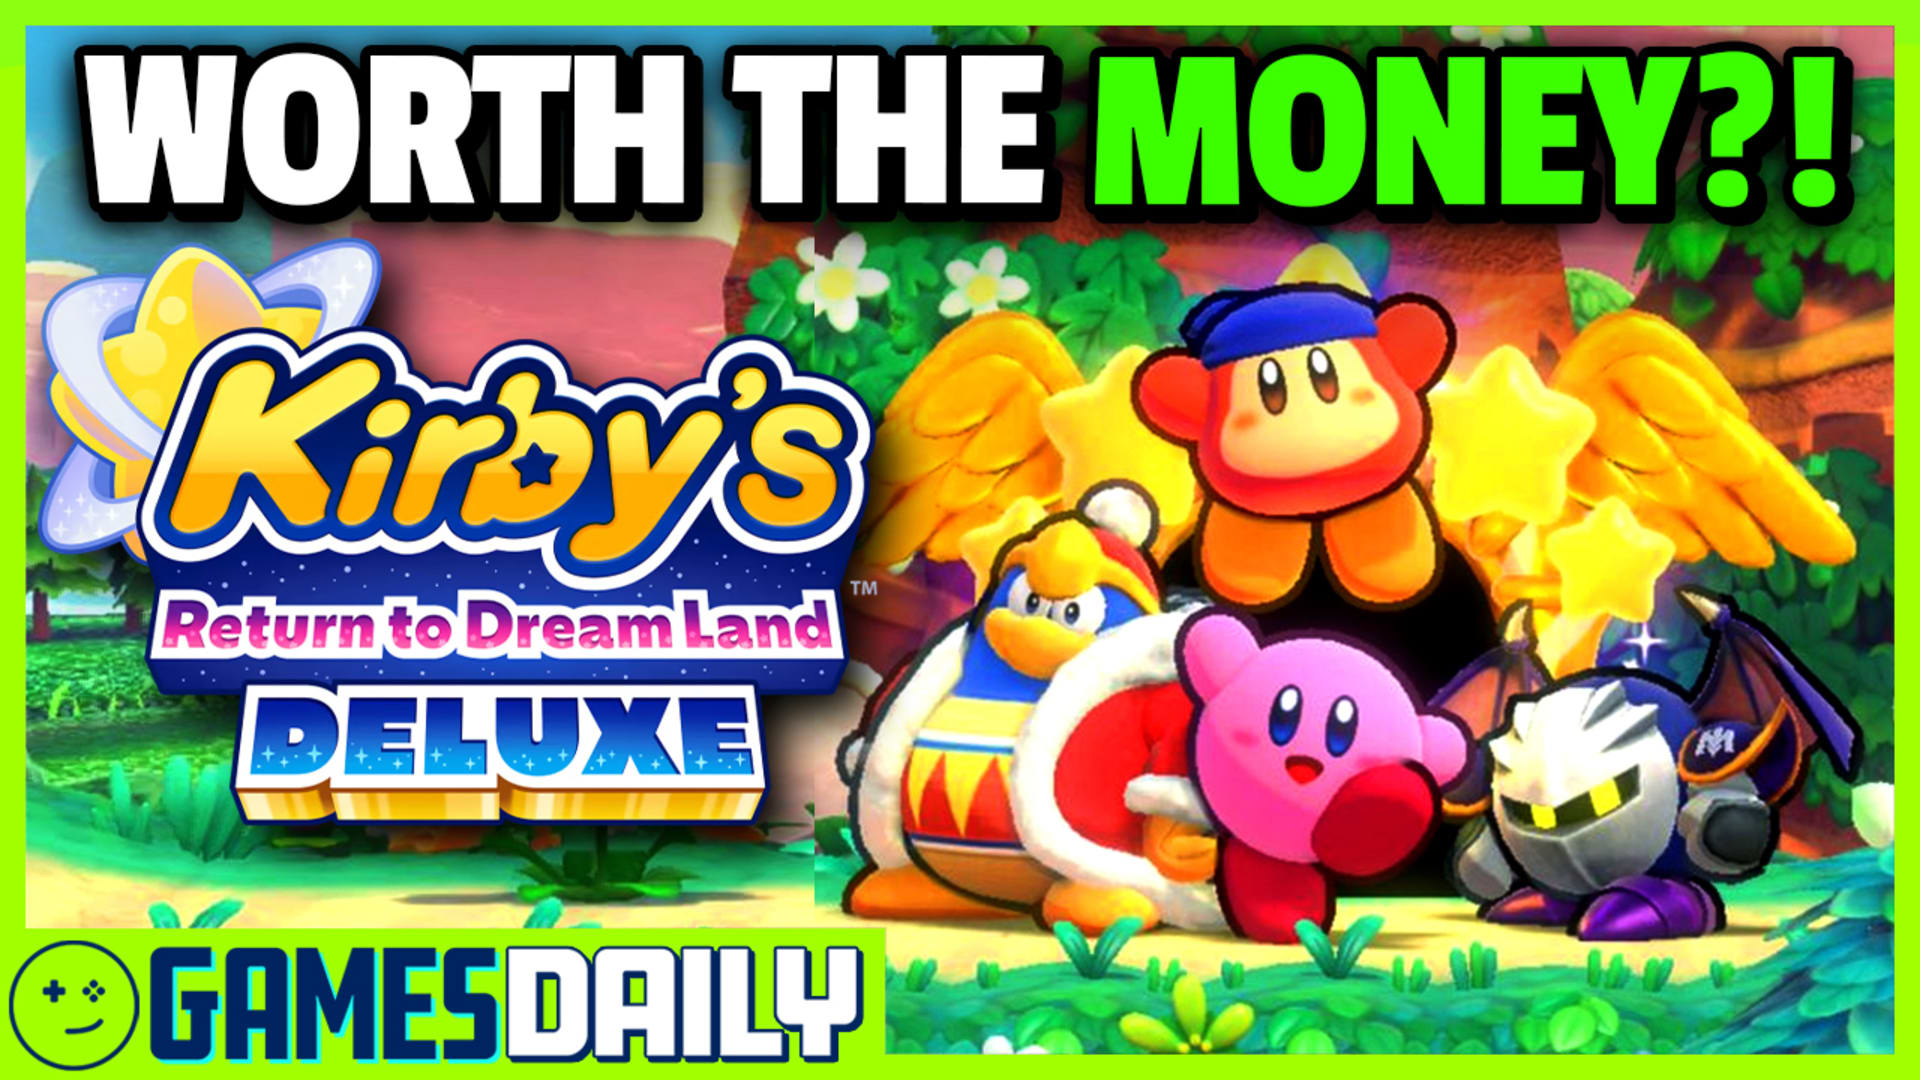 Kirby's Return to Dream Land Deluxe: A Worthy Upgrade? 